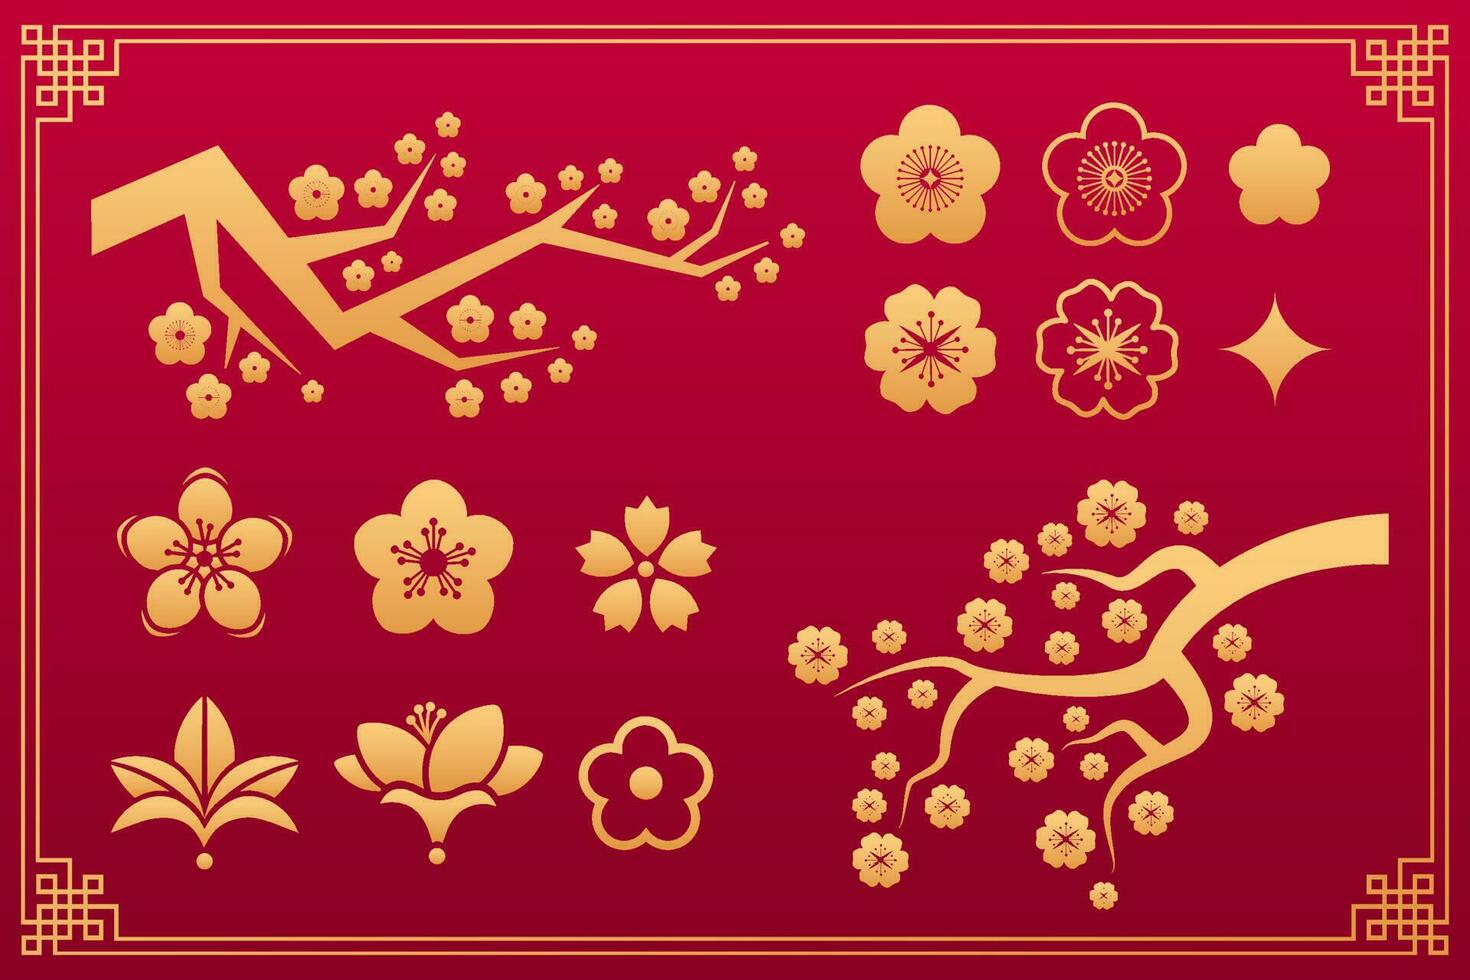 Chinese pattern. Orient asian traditional decorative gold vector ornaments. Floral plant elements sakura flower, leaves, blossom and branch isolated on red background with frame. Vector set.